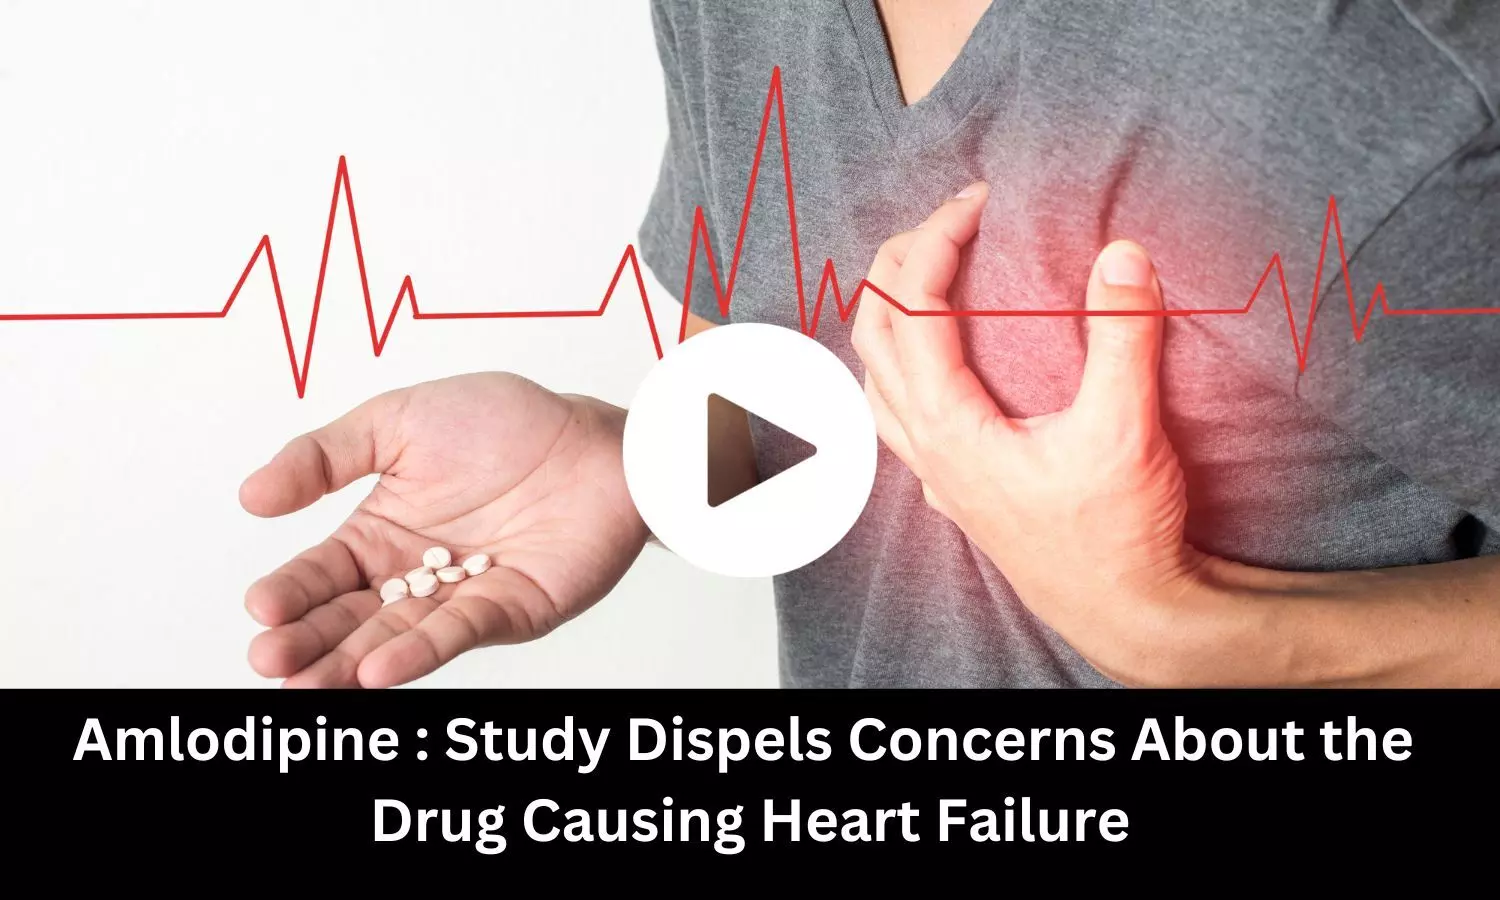 Amlodipine : Study Dispels Concerns About the Drug Causing Heart Failure